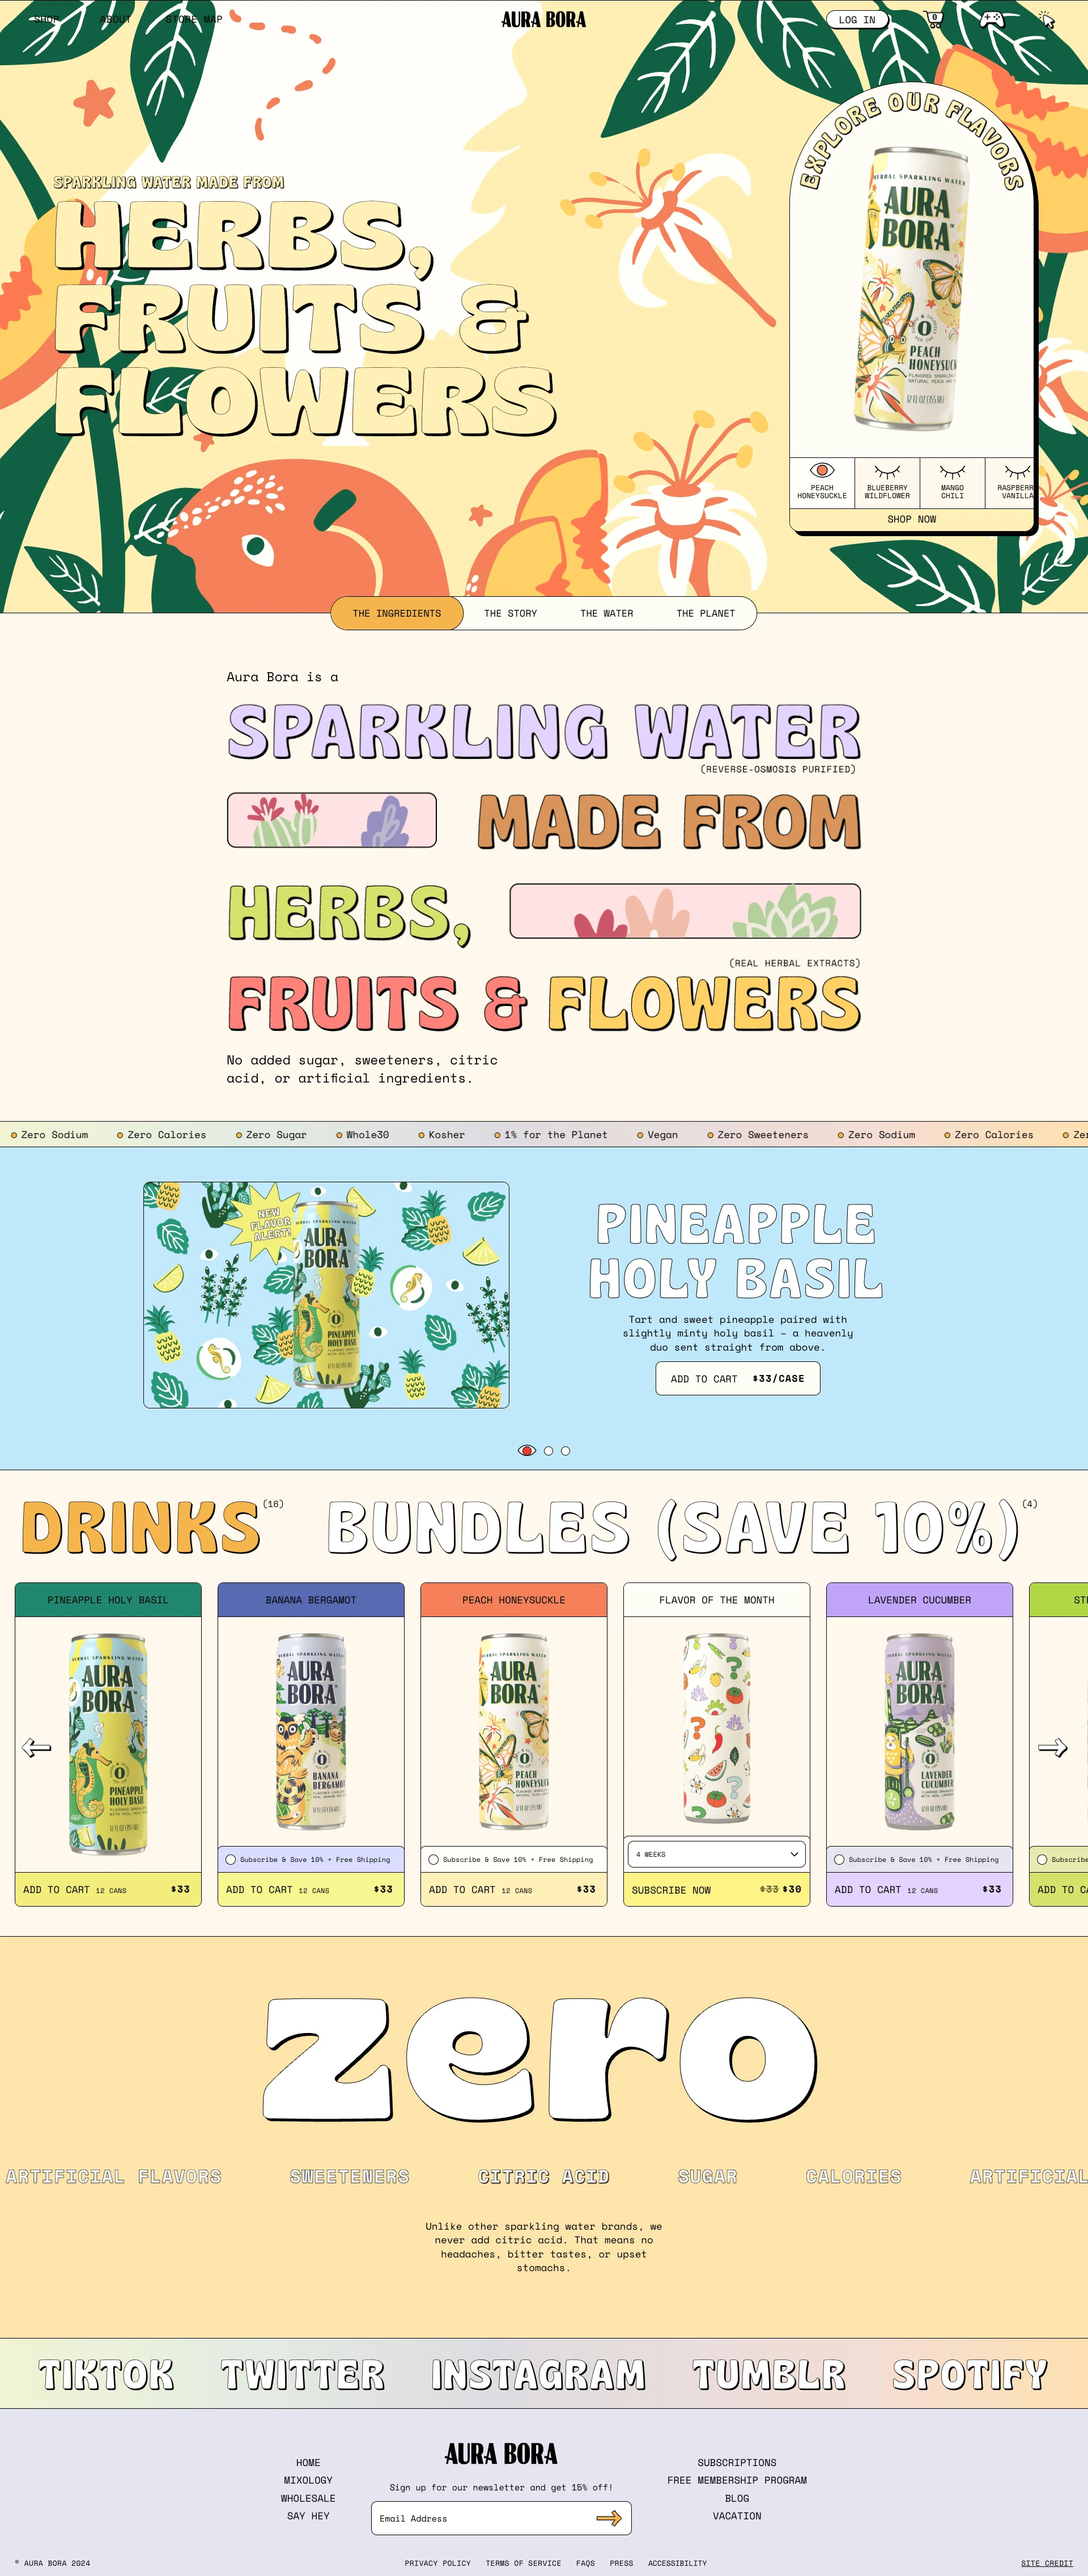 Aura Bora Landing Page Example: Aura Bora is a sparkling water made from real herbs, fruits, and flowers for earthly tastes and heavenly feelings. 0 Calories, 0 Sugar, 0 Sodium.